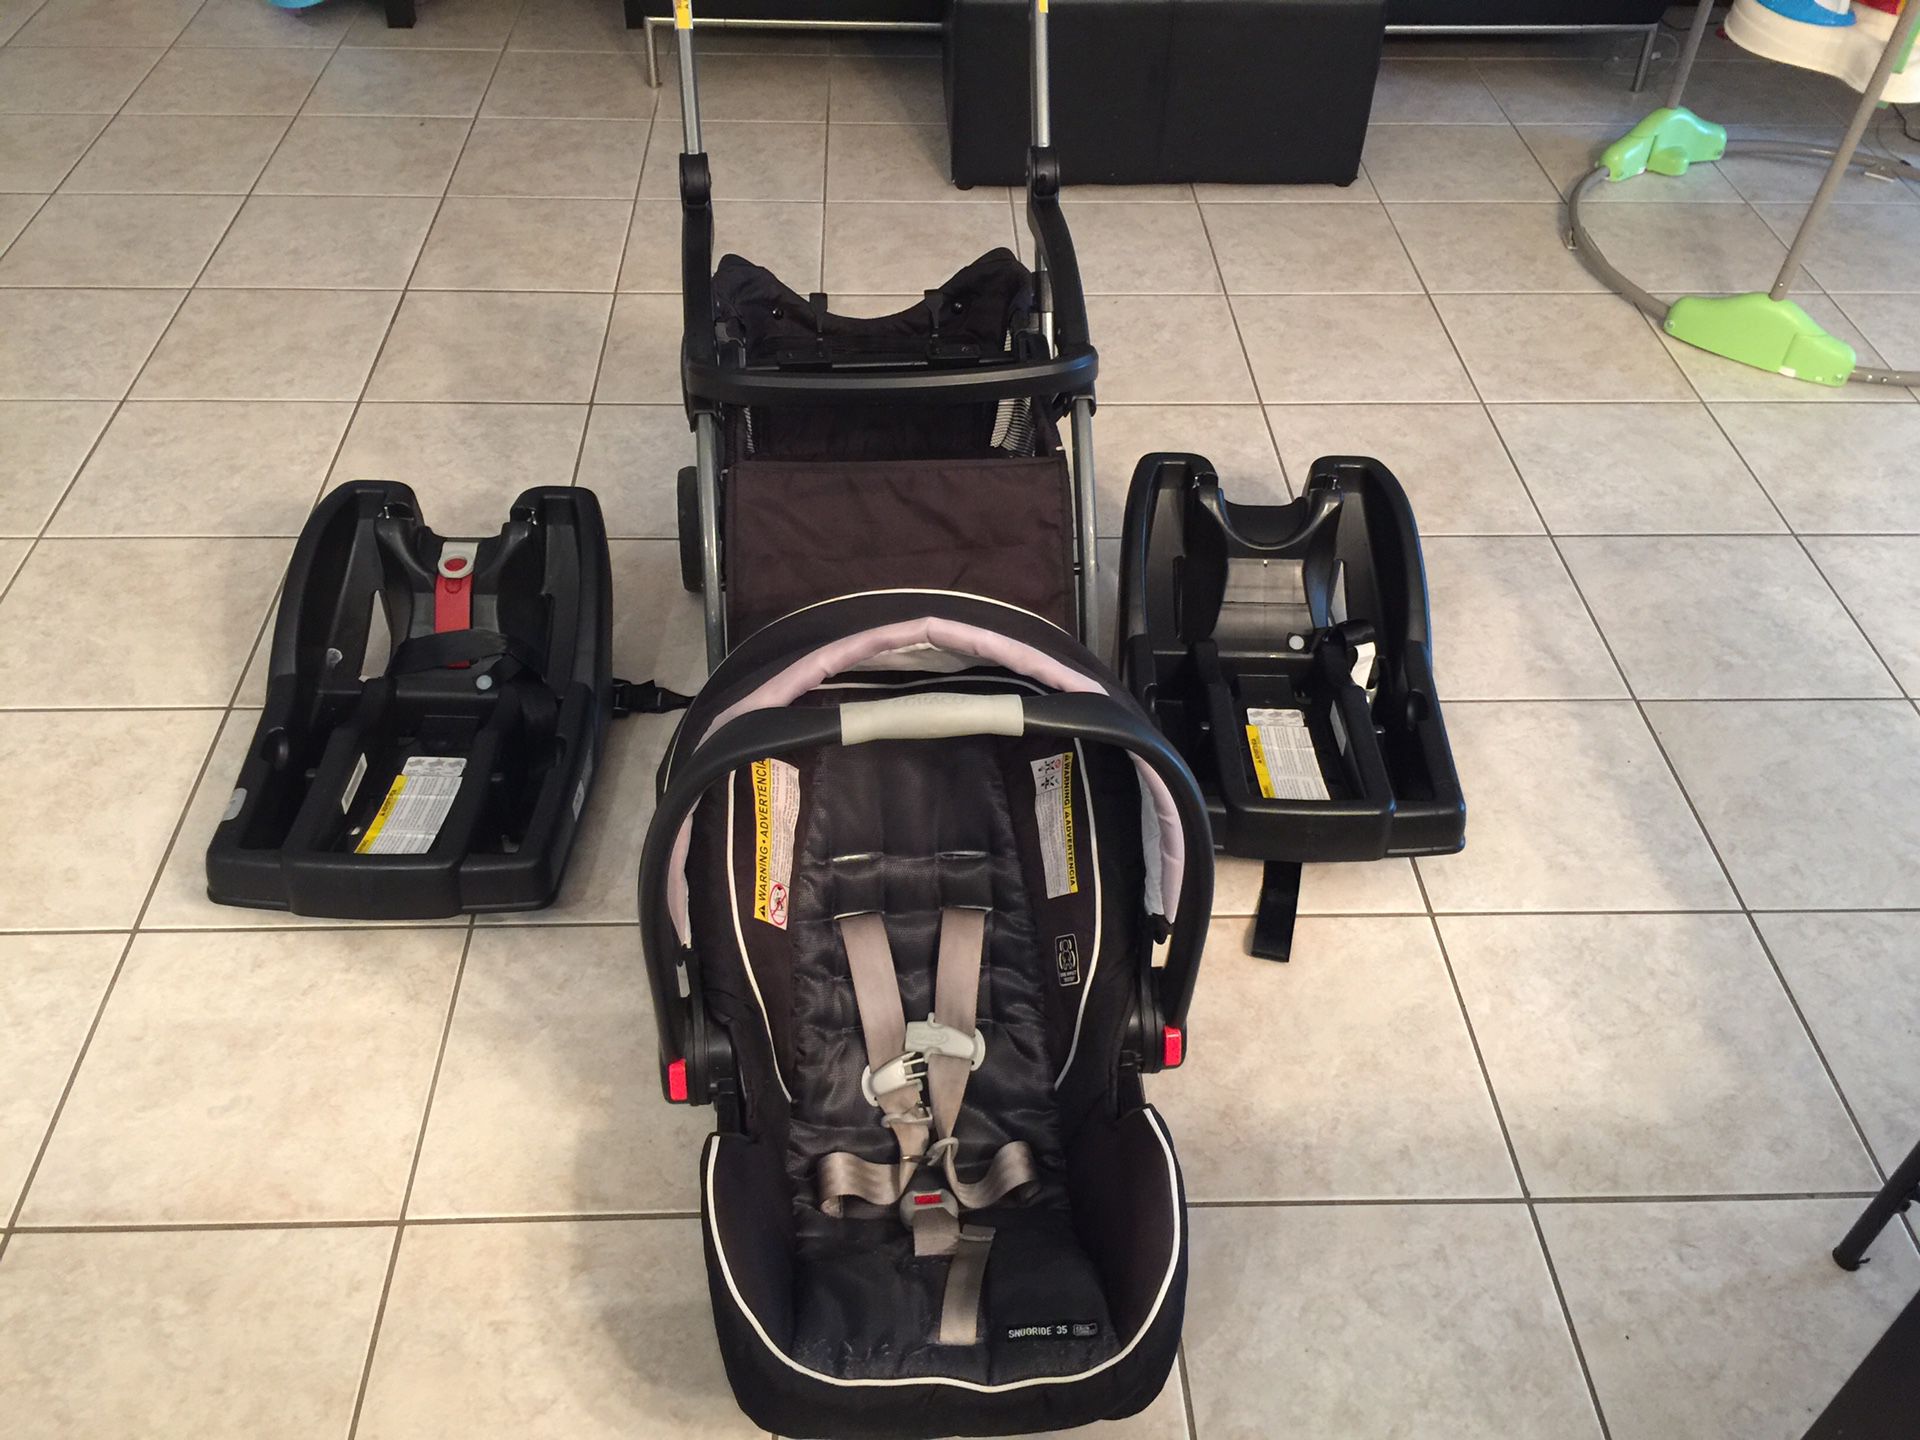 Baby car seat, stroller, and two bases